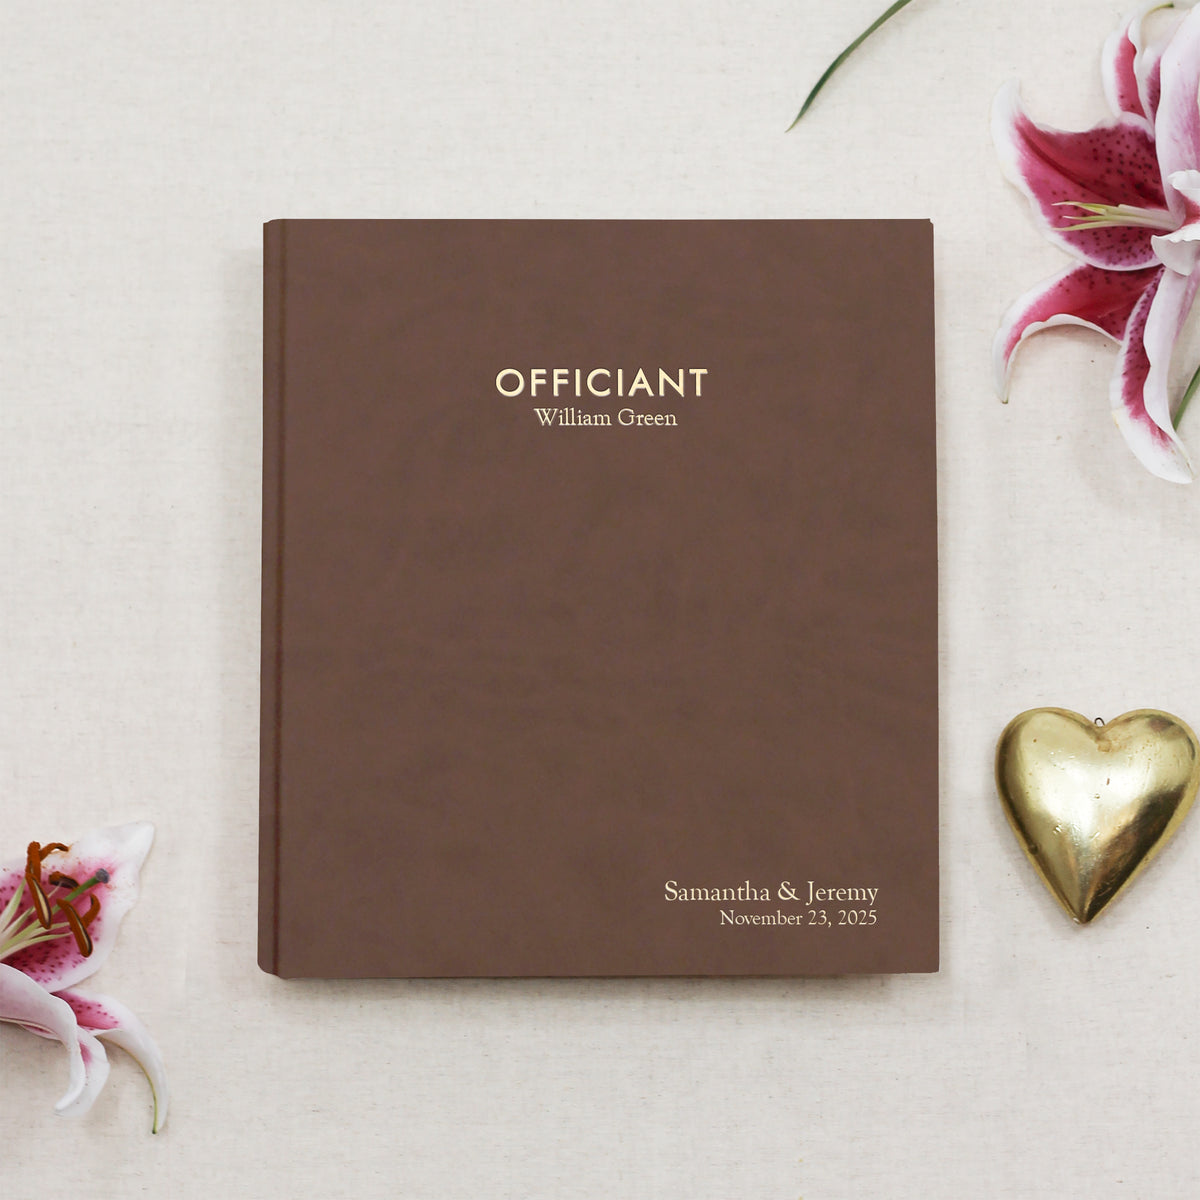 Officiant Binder | Cover: Mocha Vegan Leather | Available Personalized